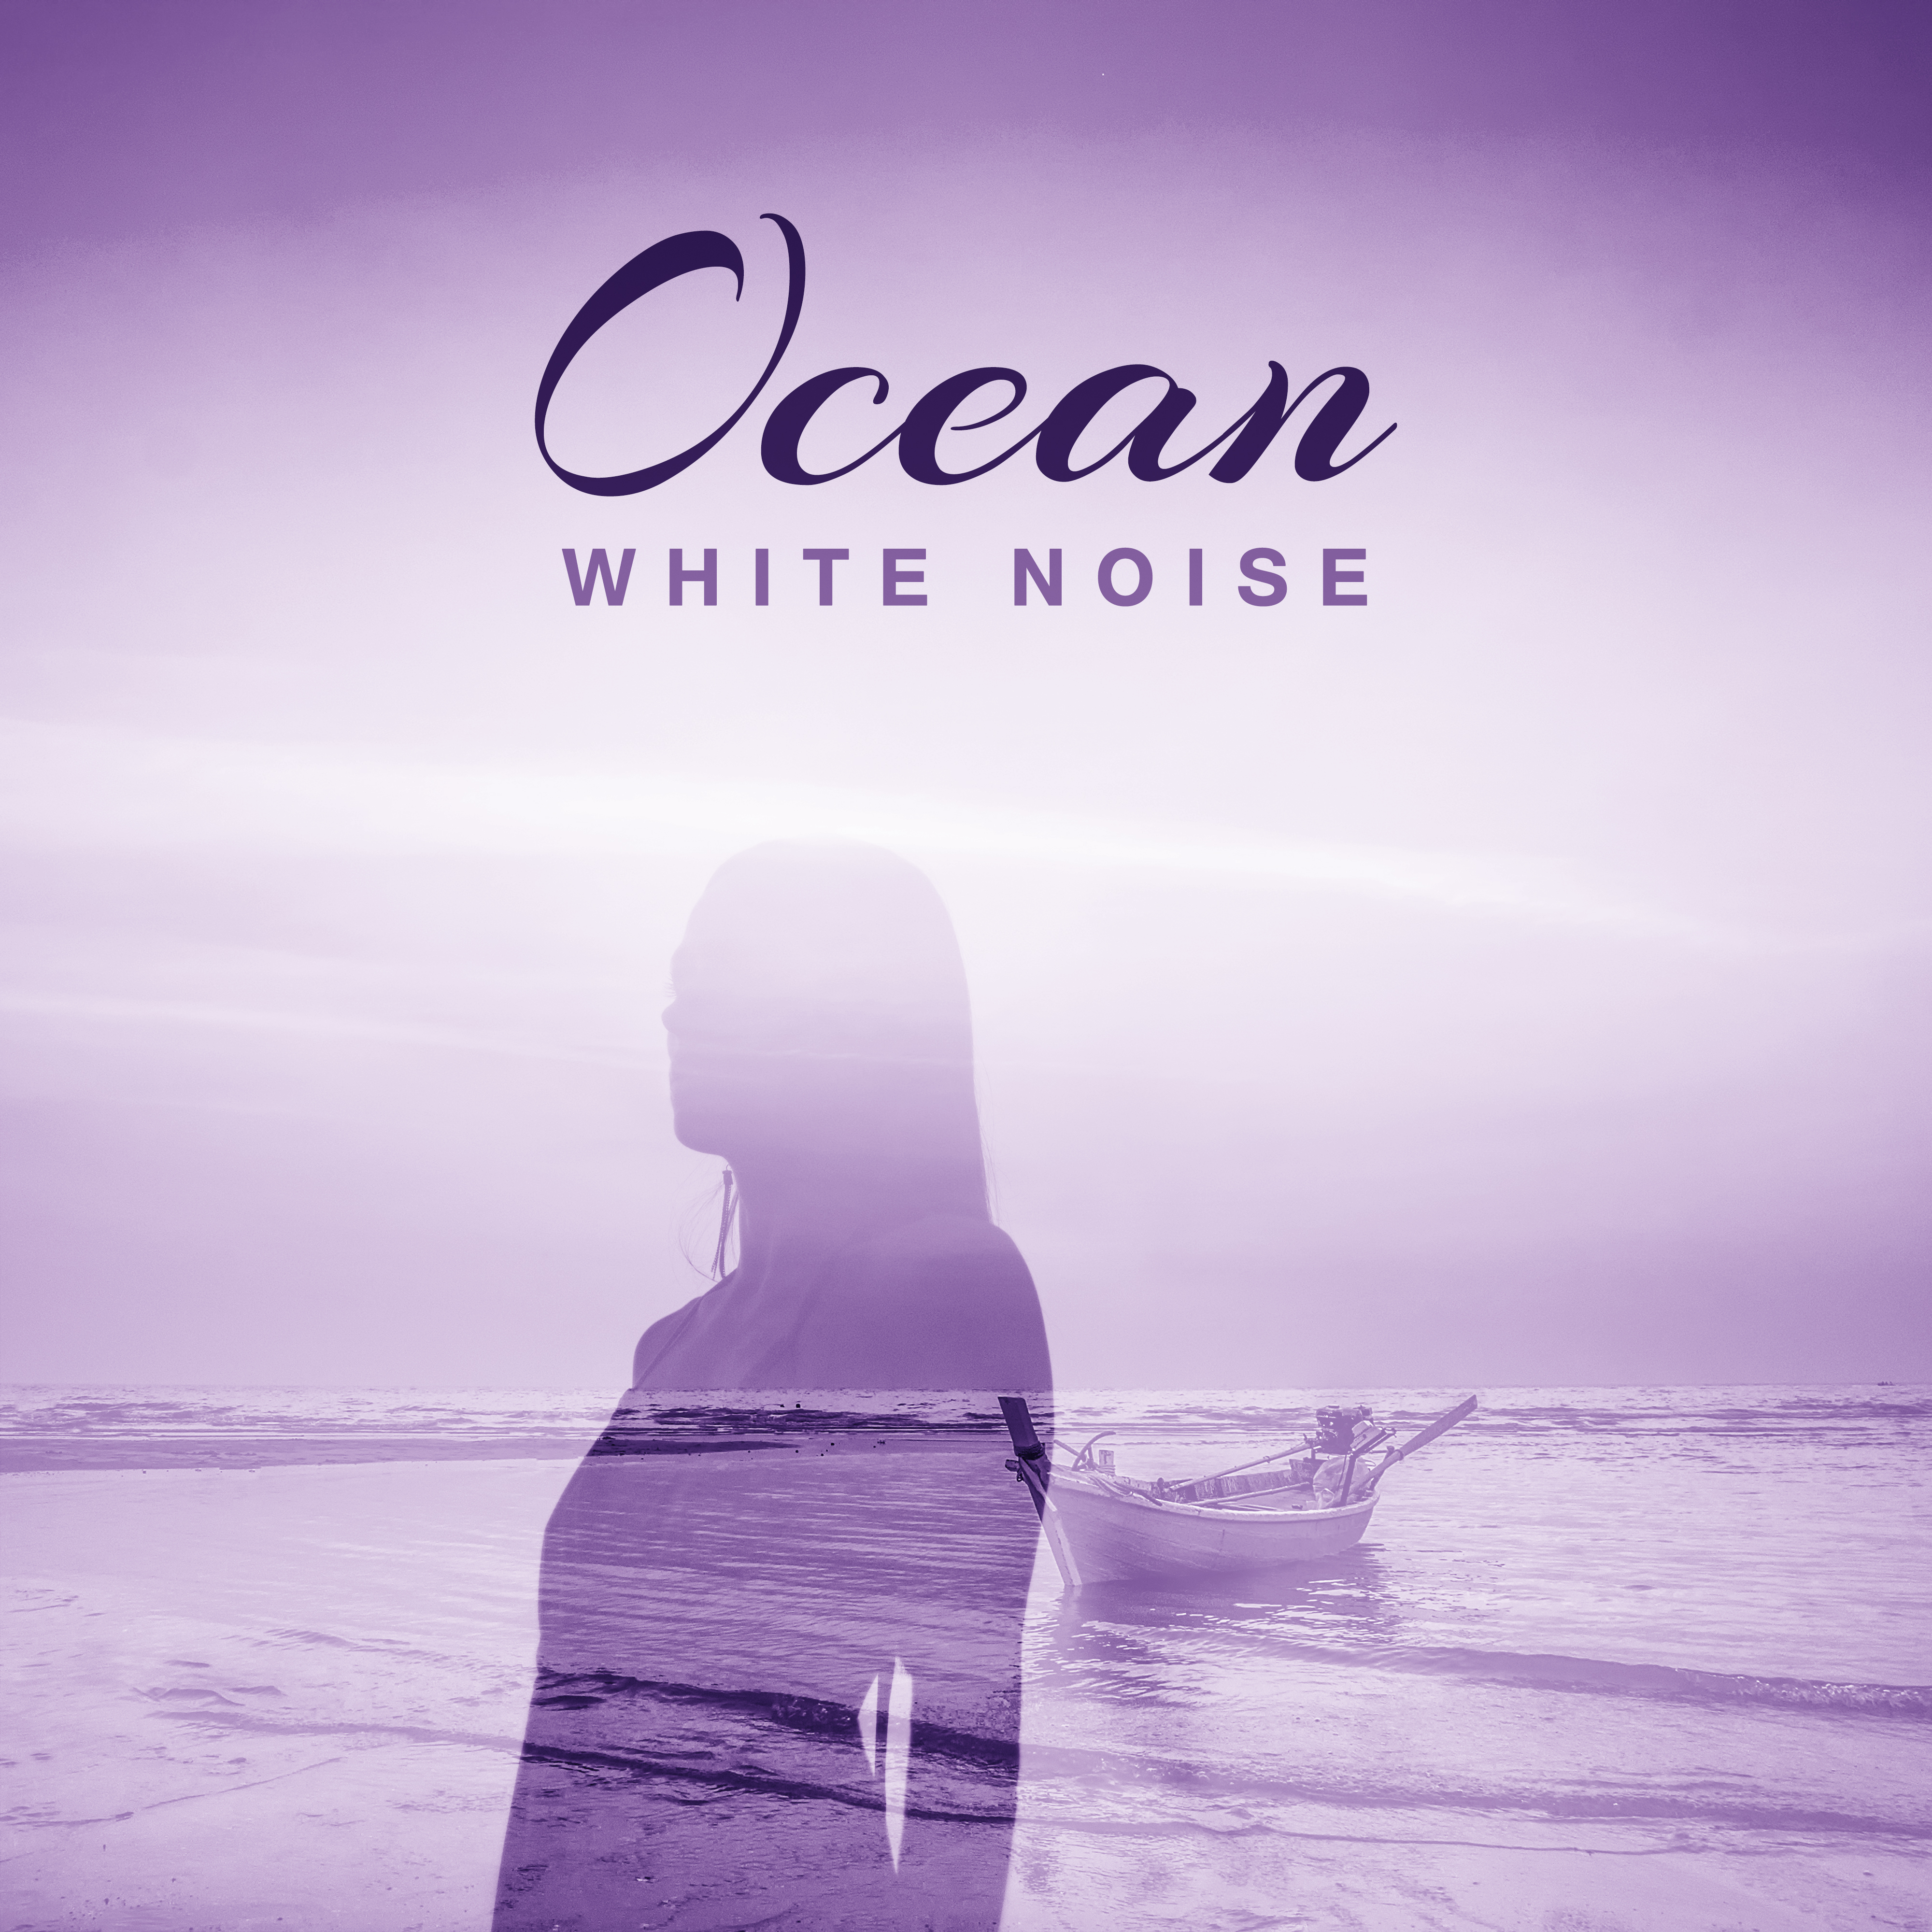 Ocean White Noise – Healing Water Sounds, Natural Music, White Noise Therapy, Relax, New Age 2017